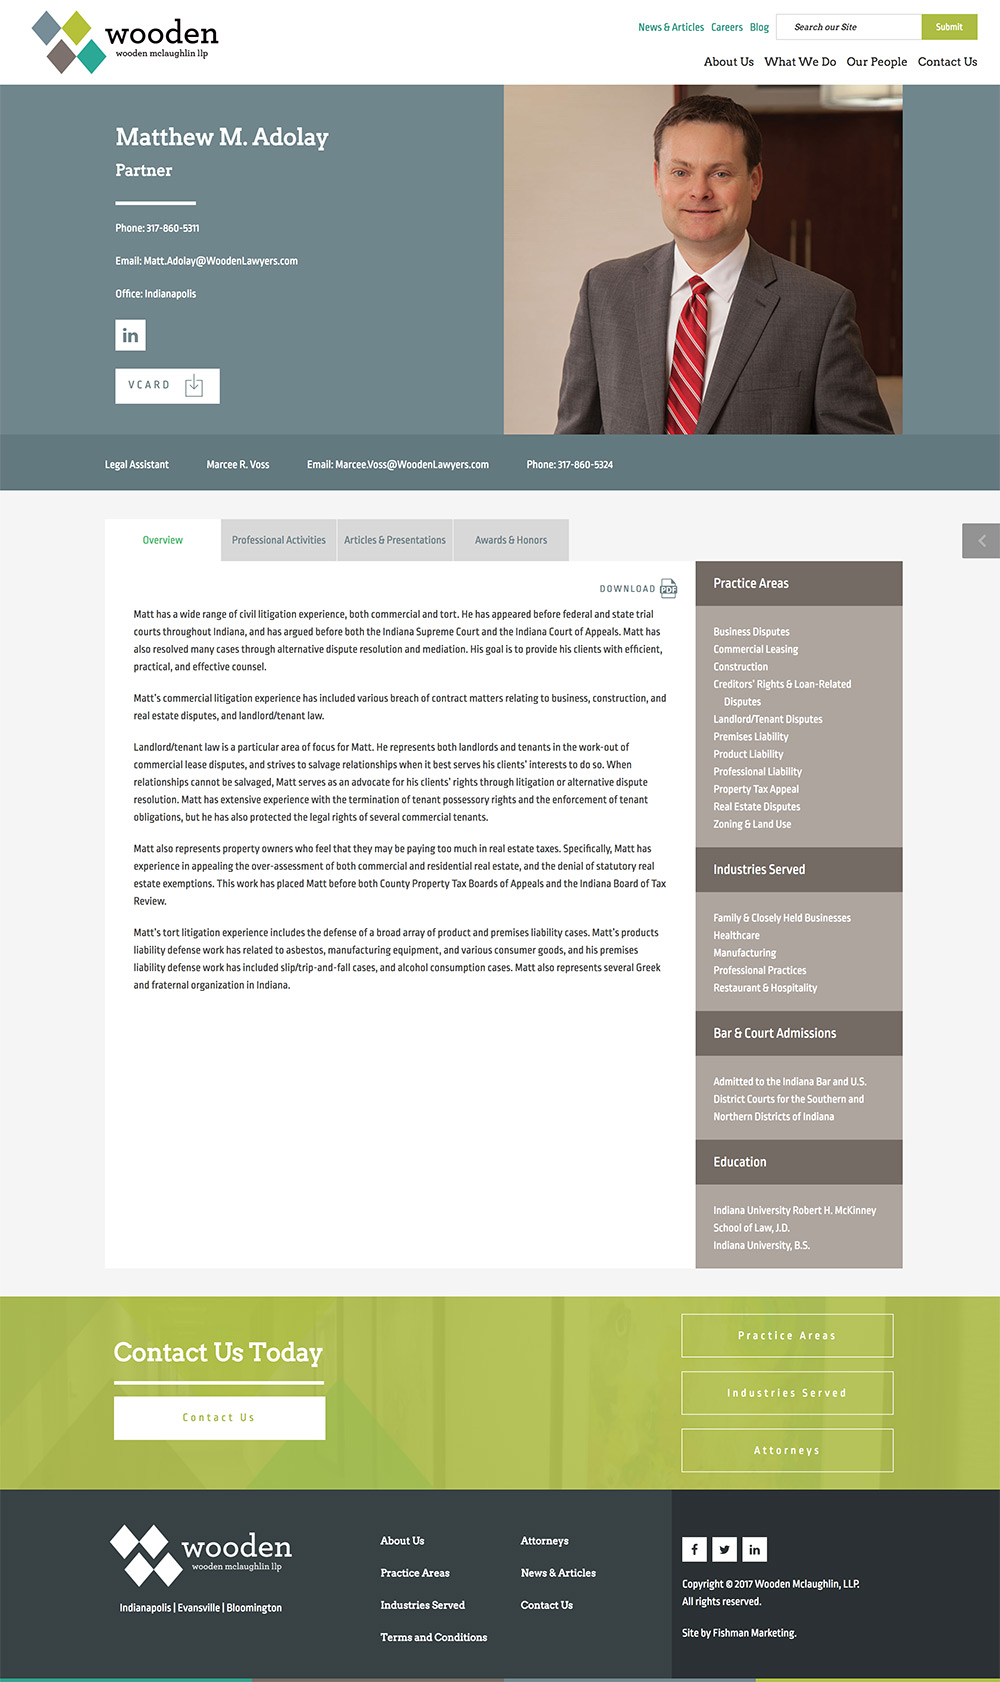 Single lawyer template for the Wooden Lawyers website